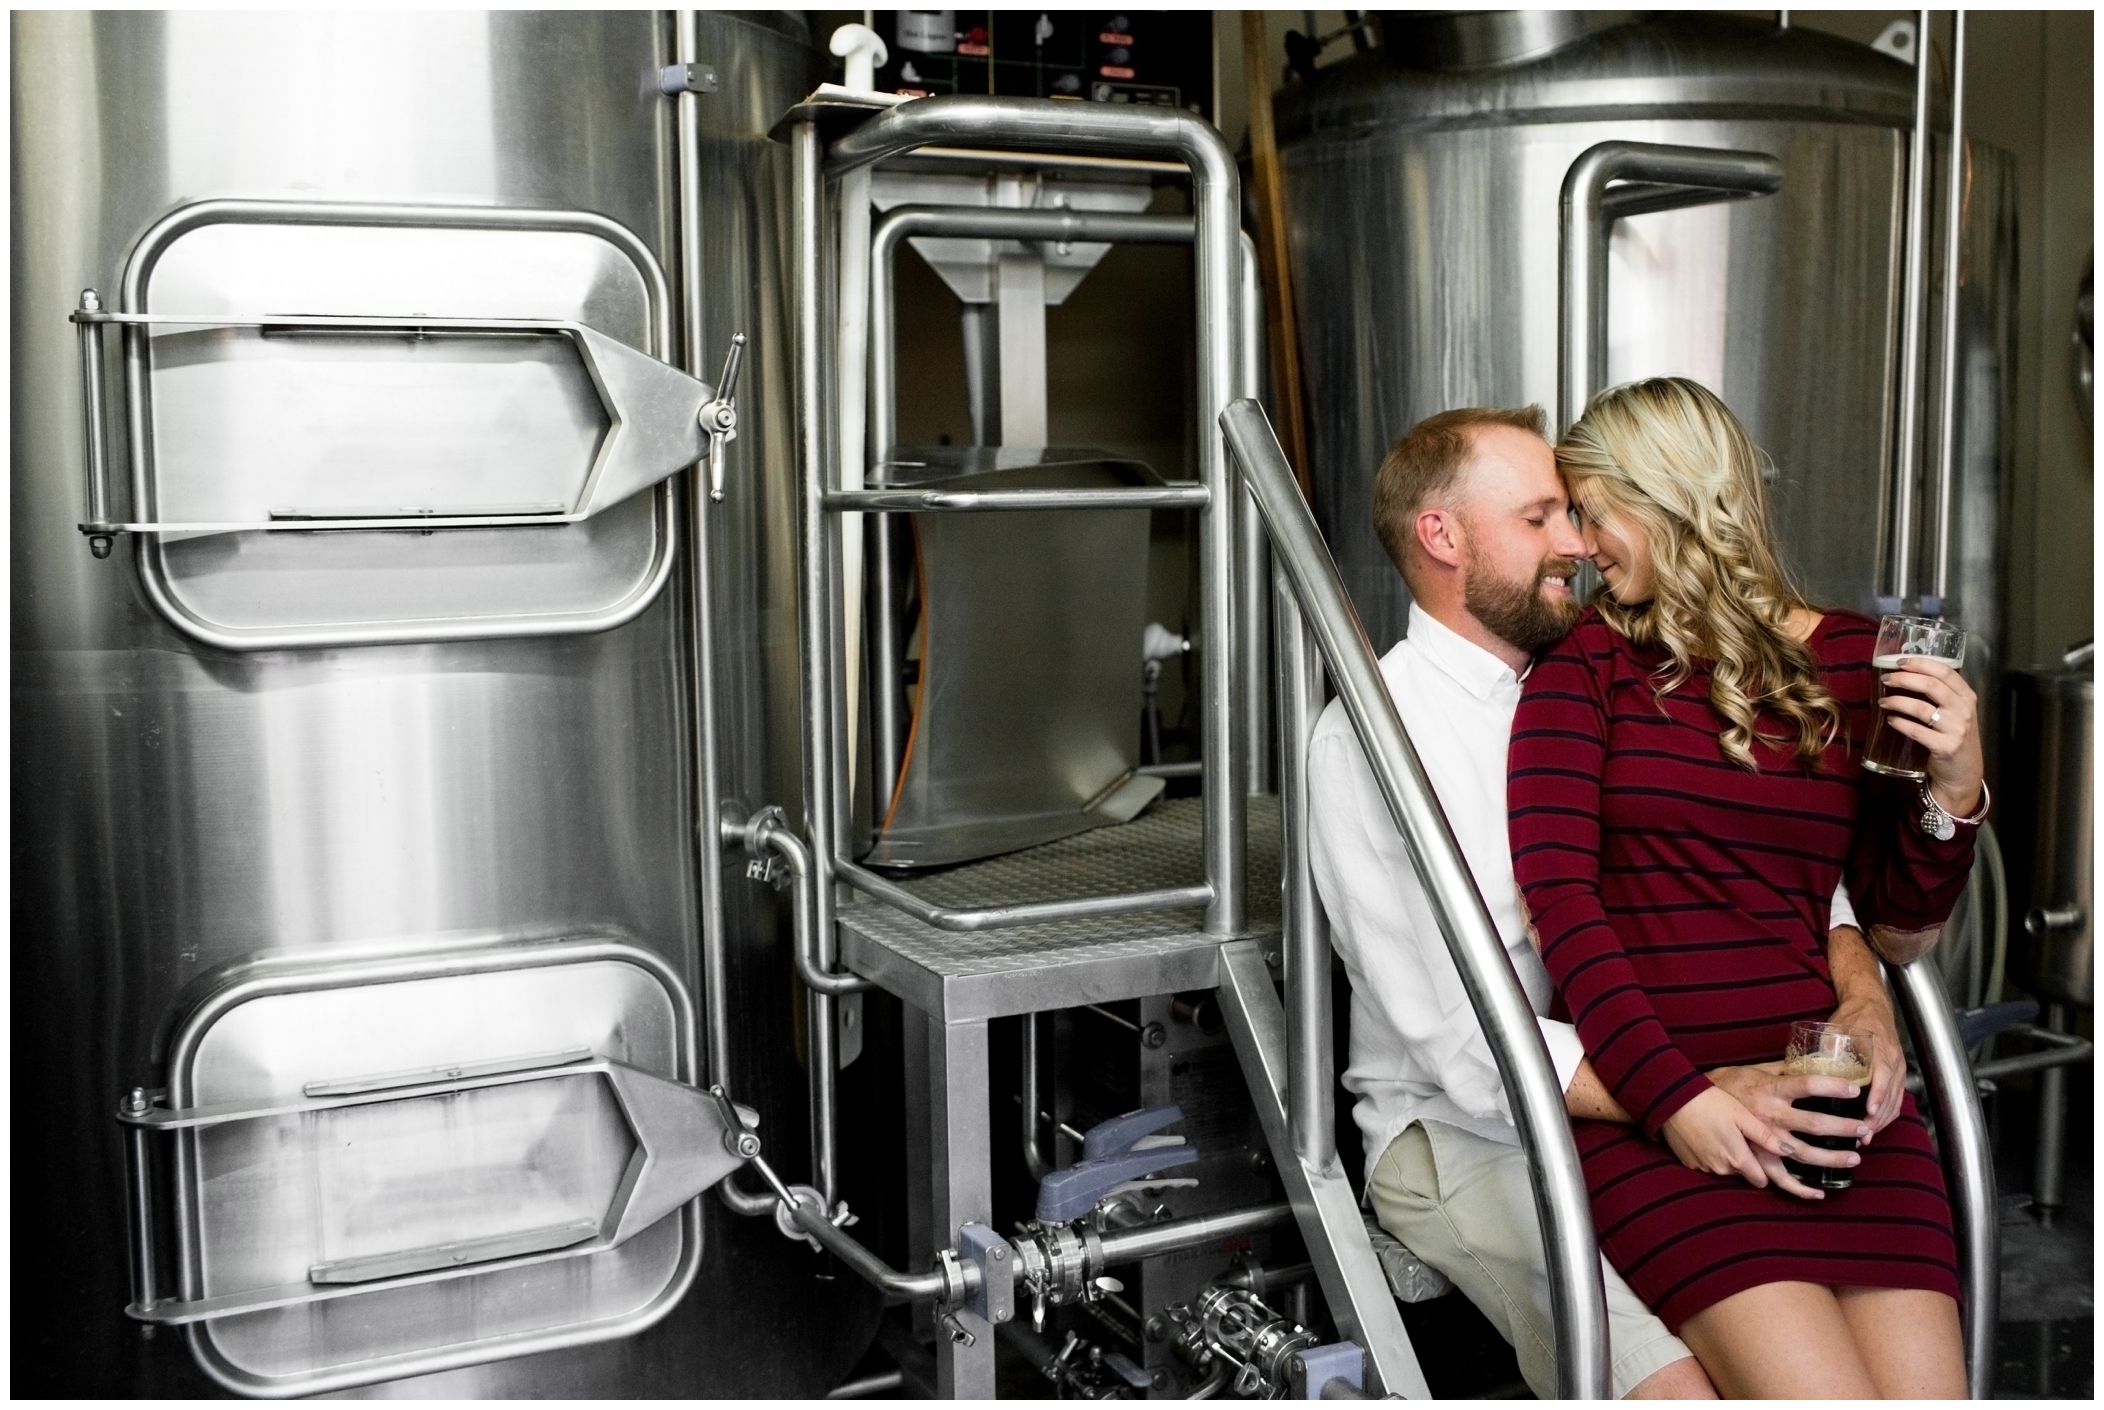 Ft. Collins Engagement photography at brewery by Colorado wedding photographer Plum Pretty Photography